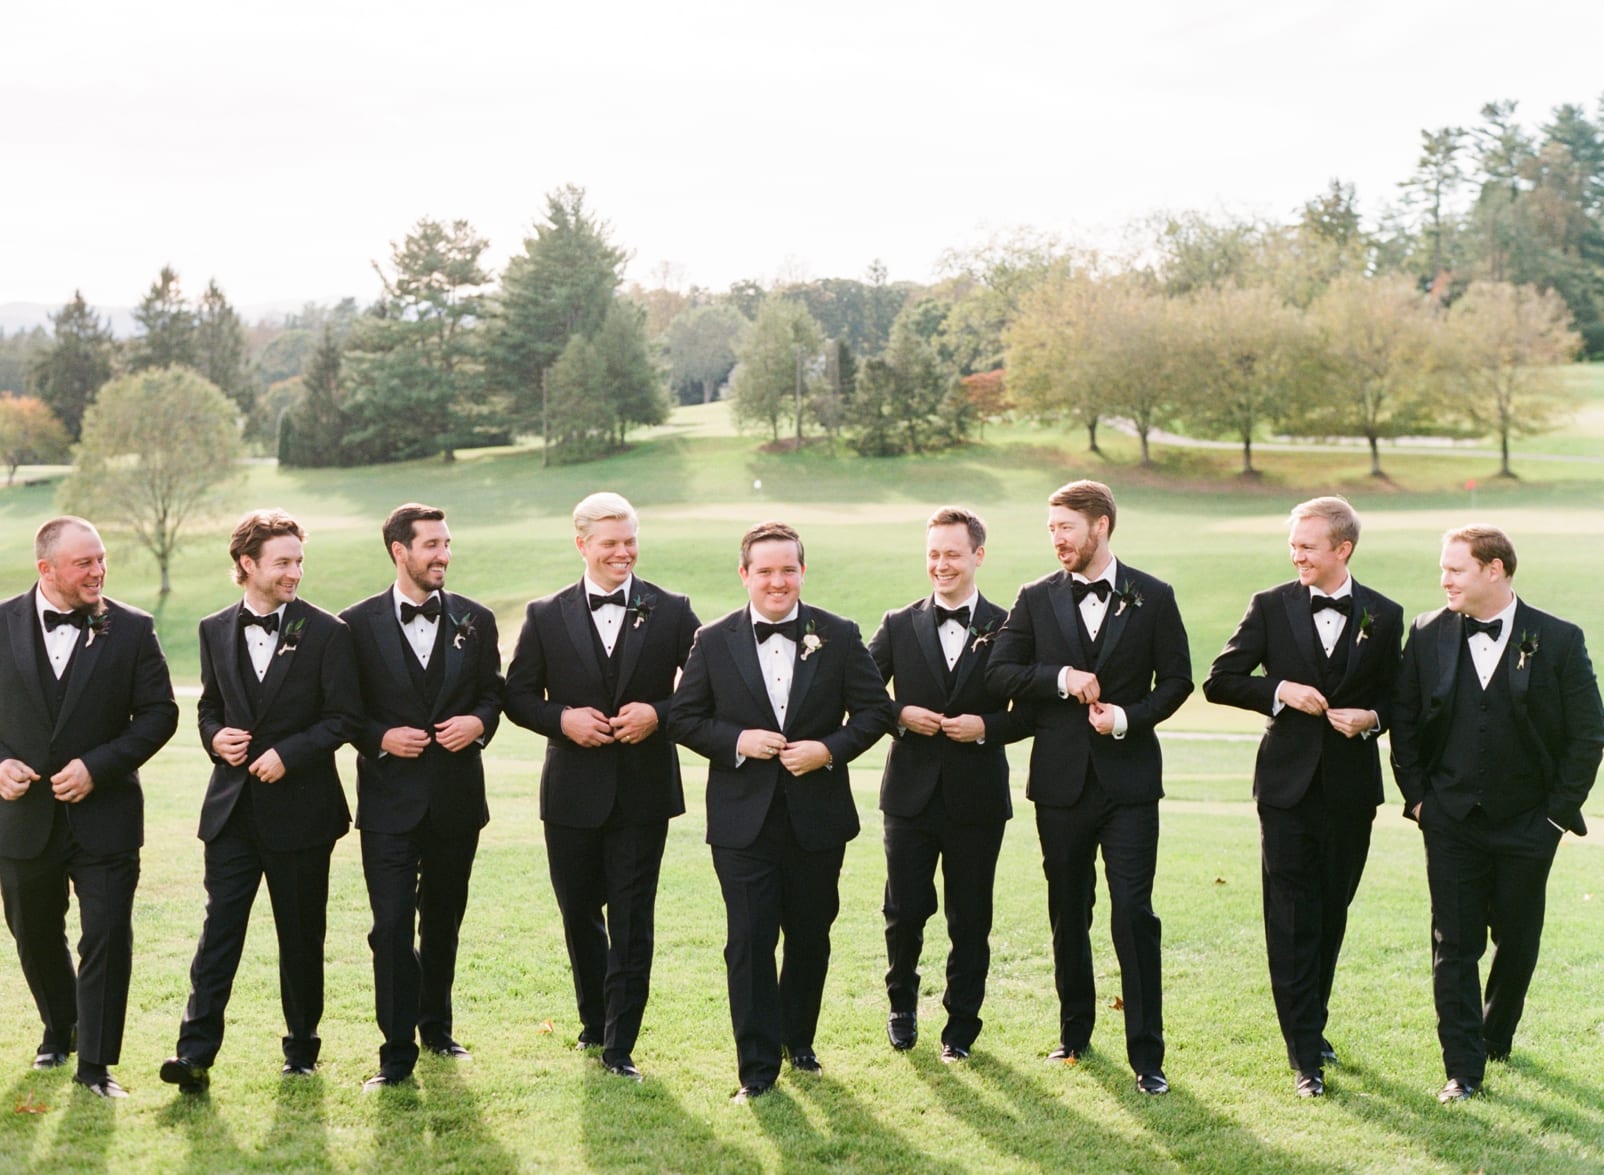 The Black tux groomsmen and groom in black tuxes walking while buttoning their jacket photo